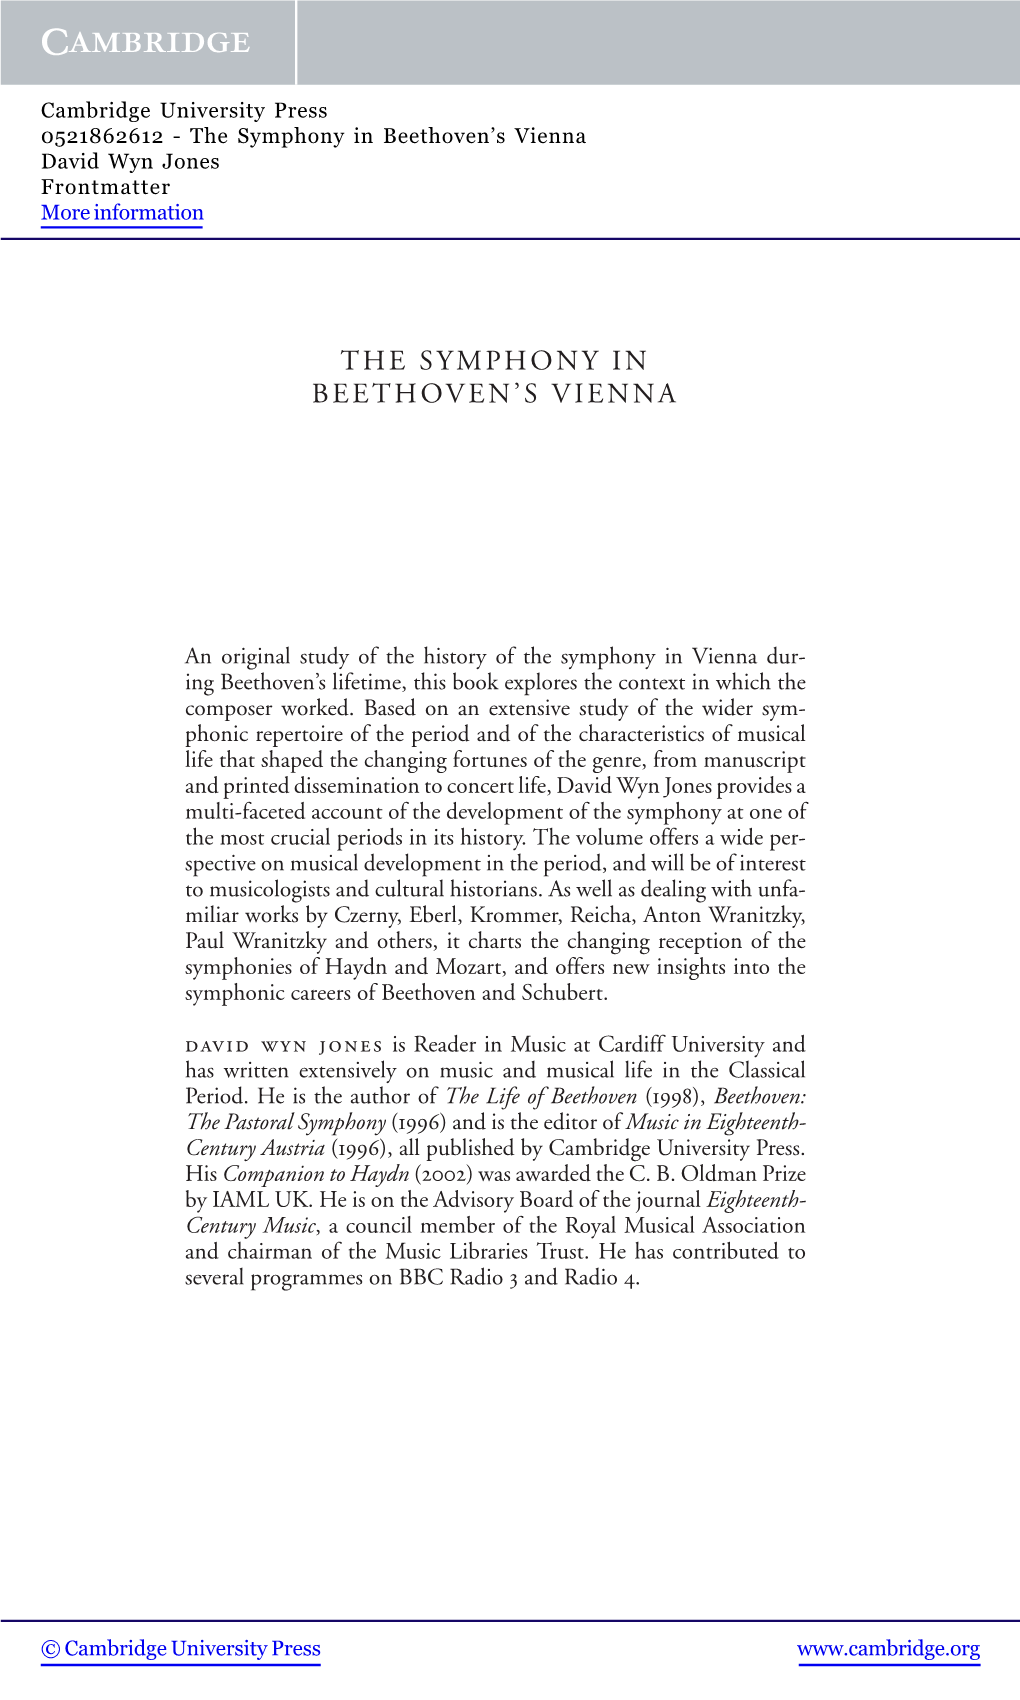 The Symphony in Beethoven's Vienna